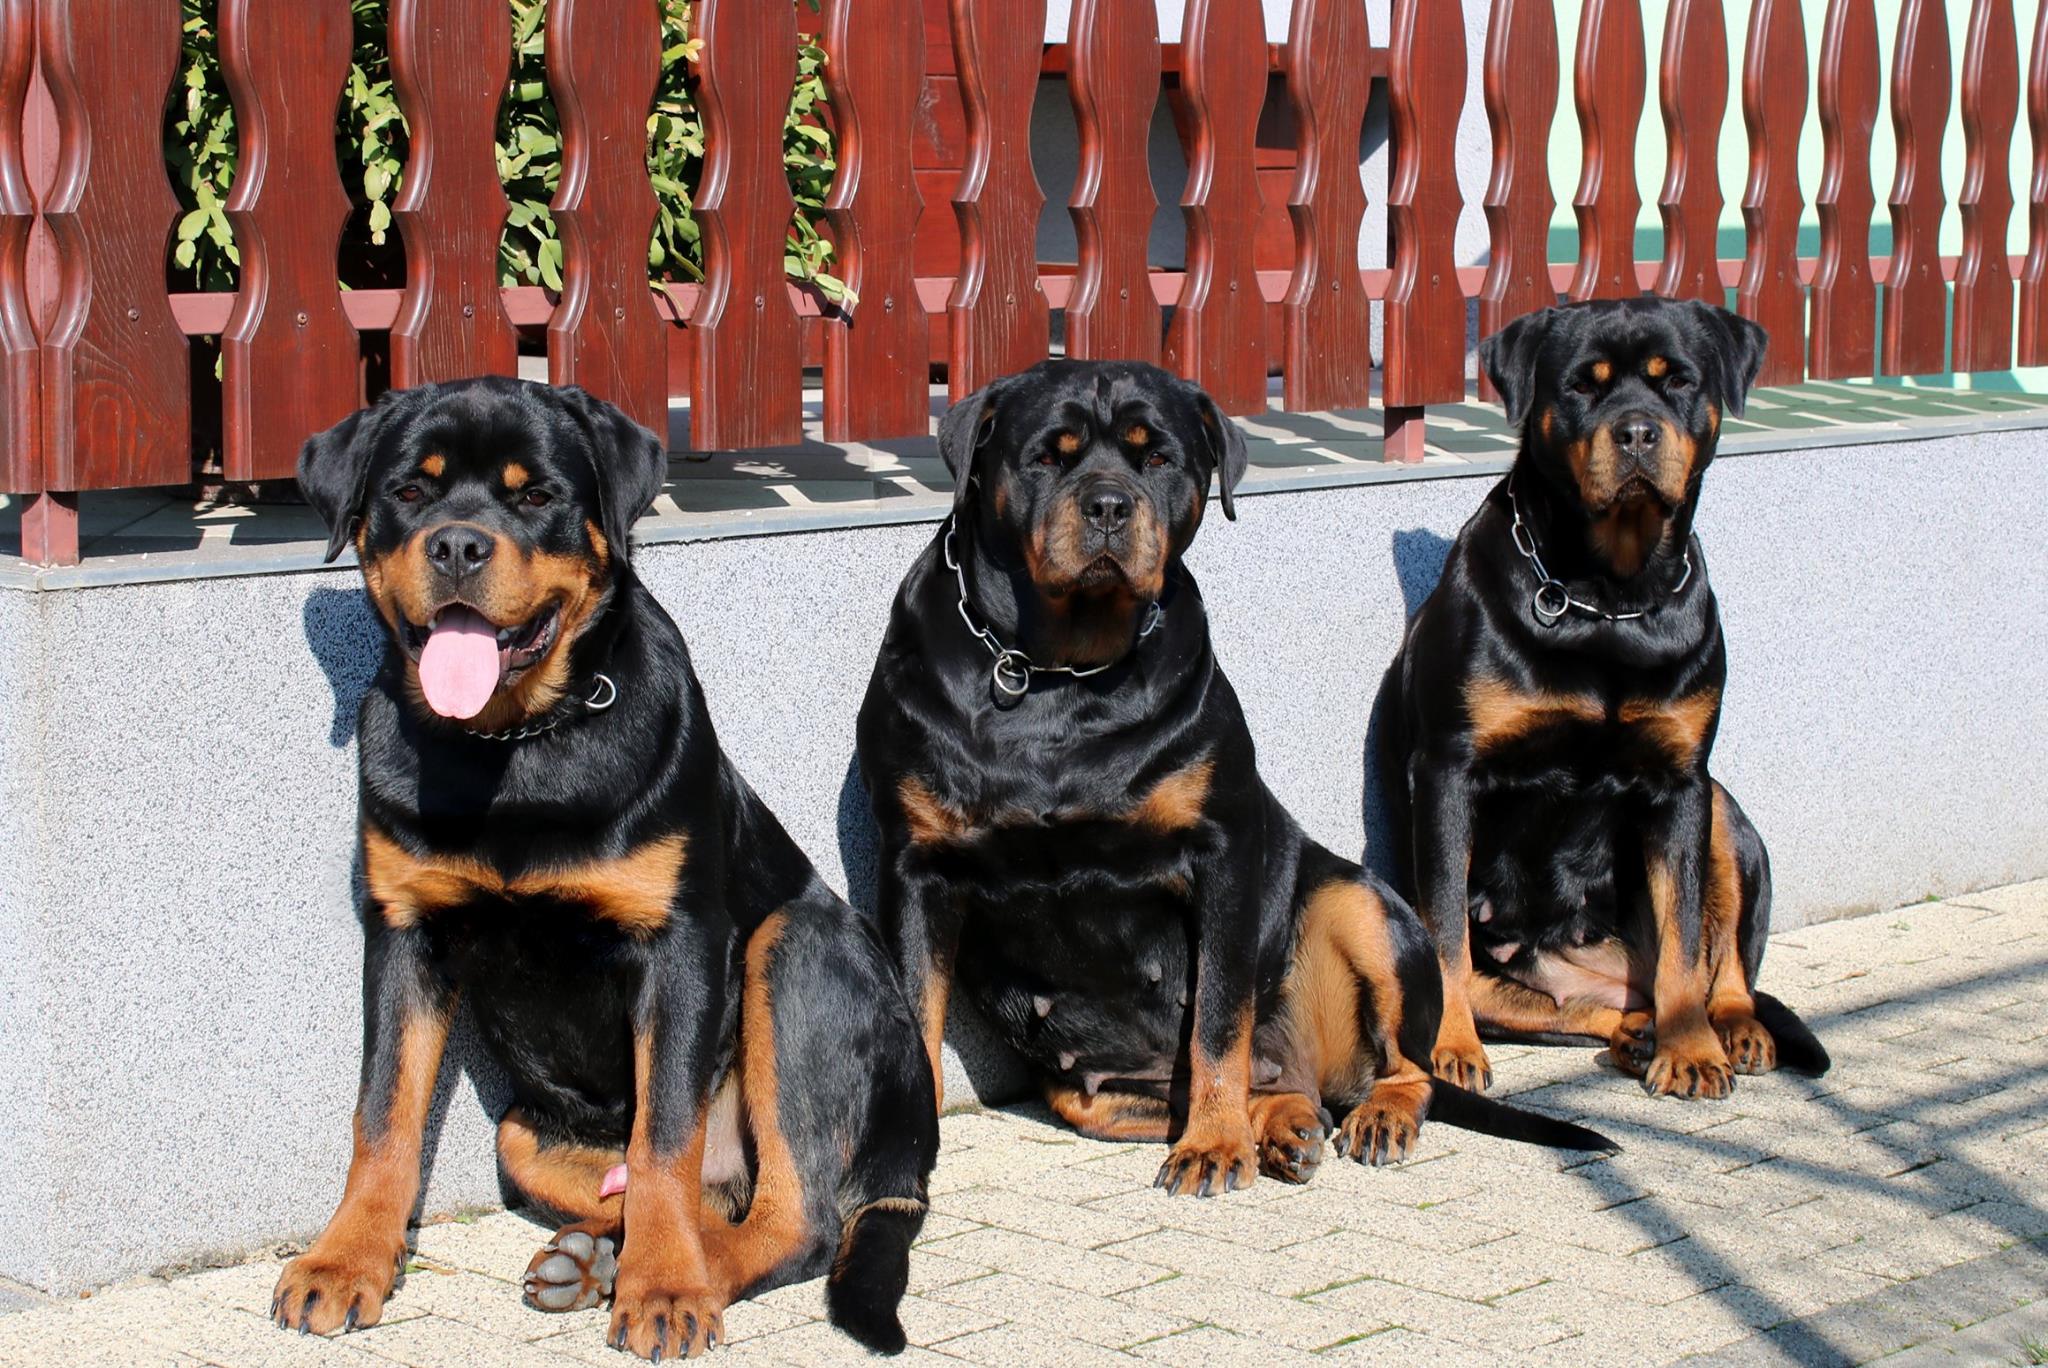 three Rottweilers sitting on the pavement beside the fence under the sun